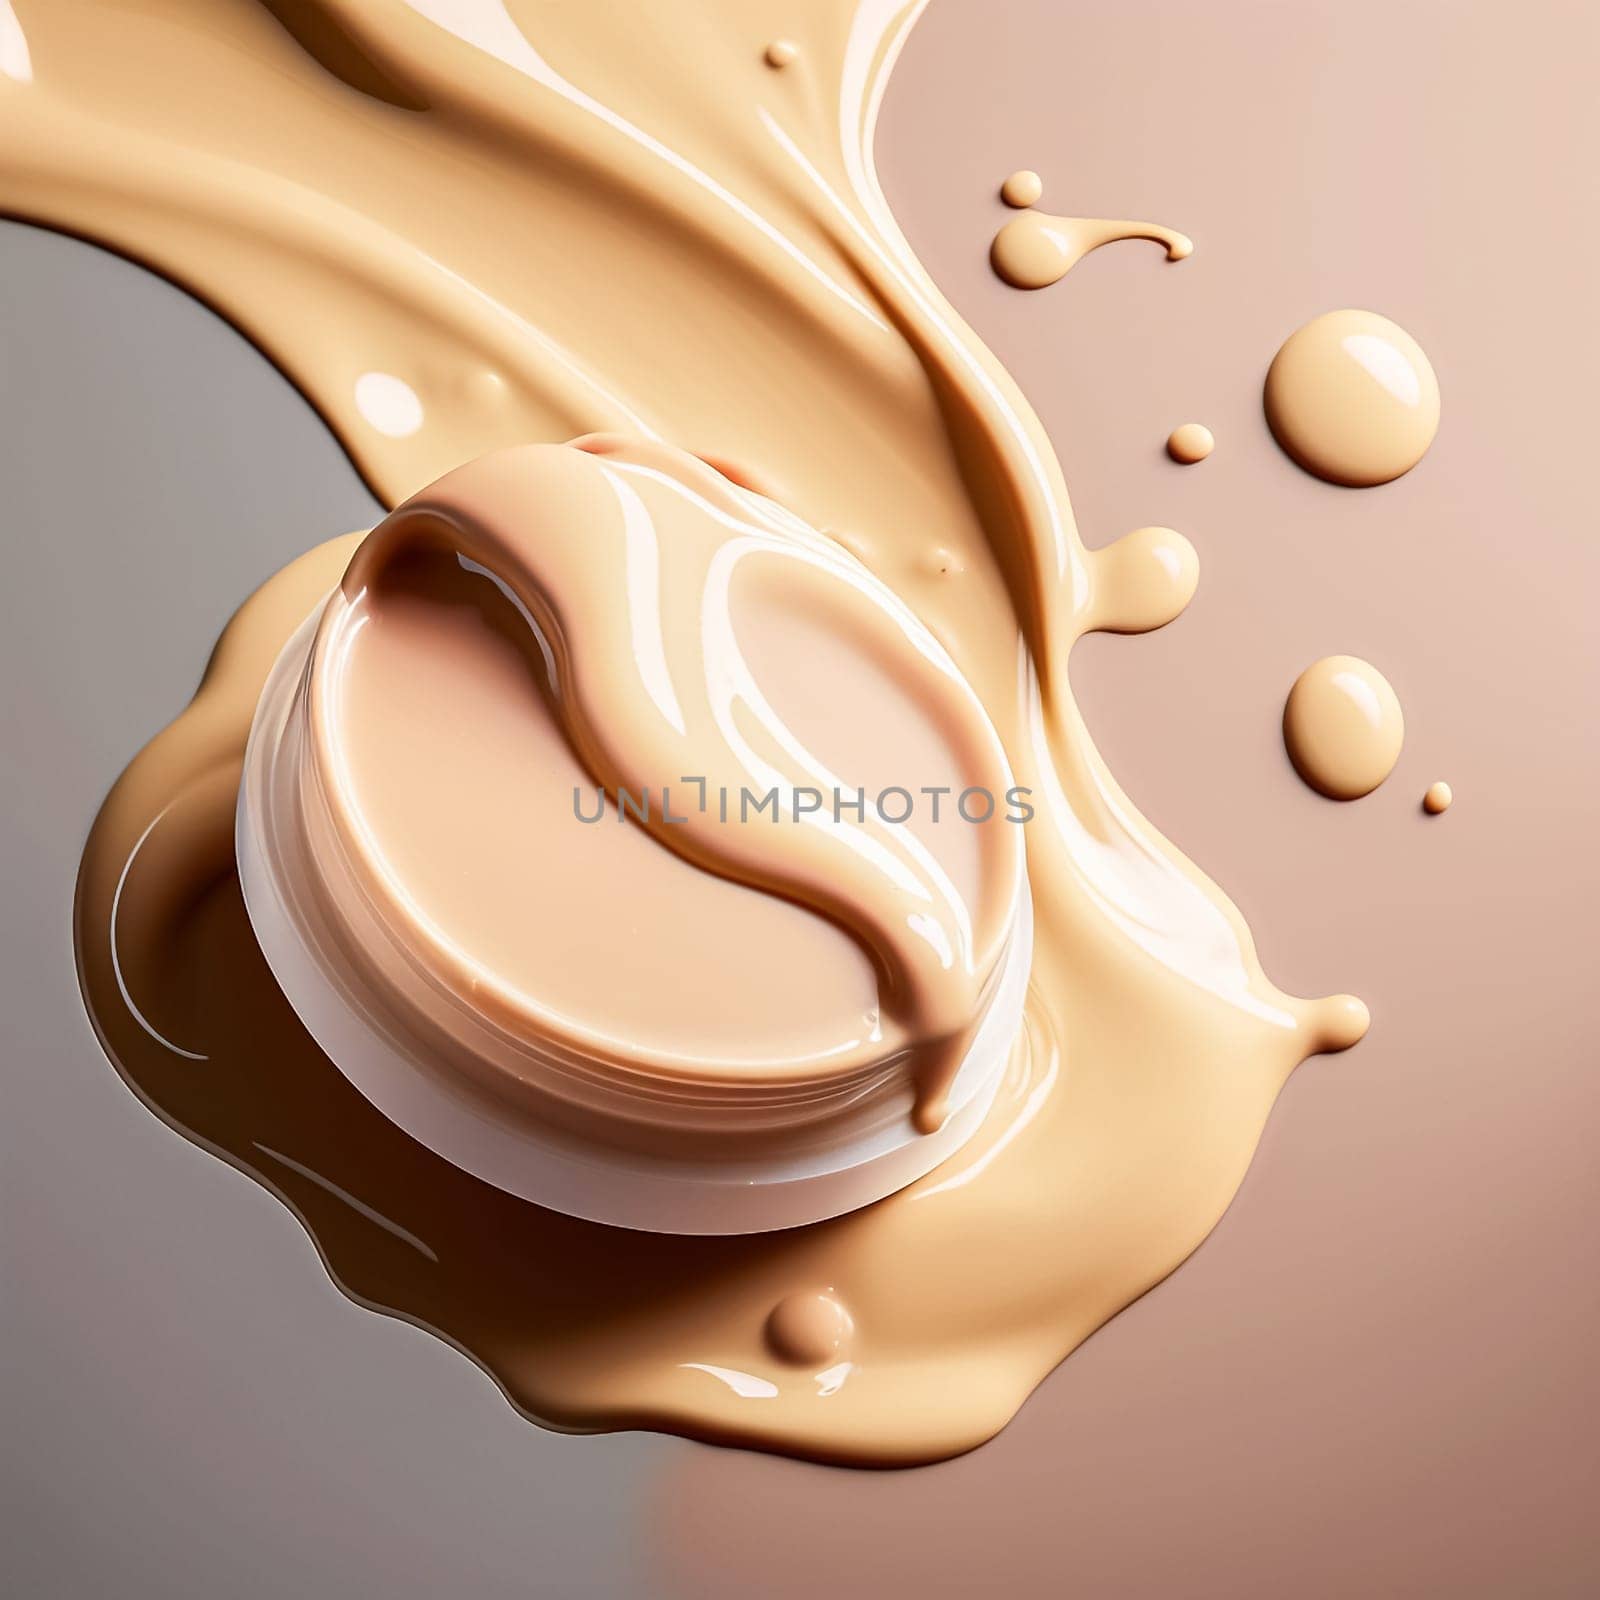 Liquid foundation splashes on light clean background close up of isolated make up smudges or beige skin care fluid. Standard illustration for beauty and cosmetics.